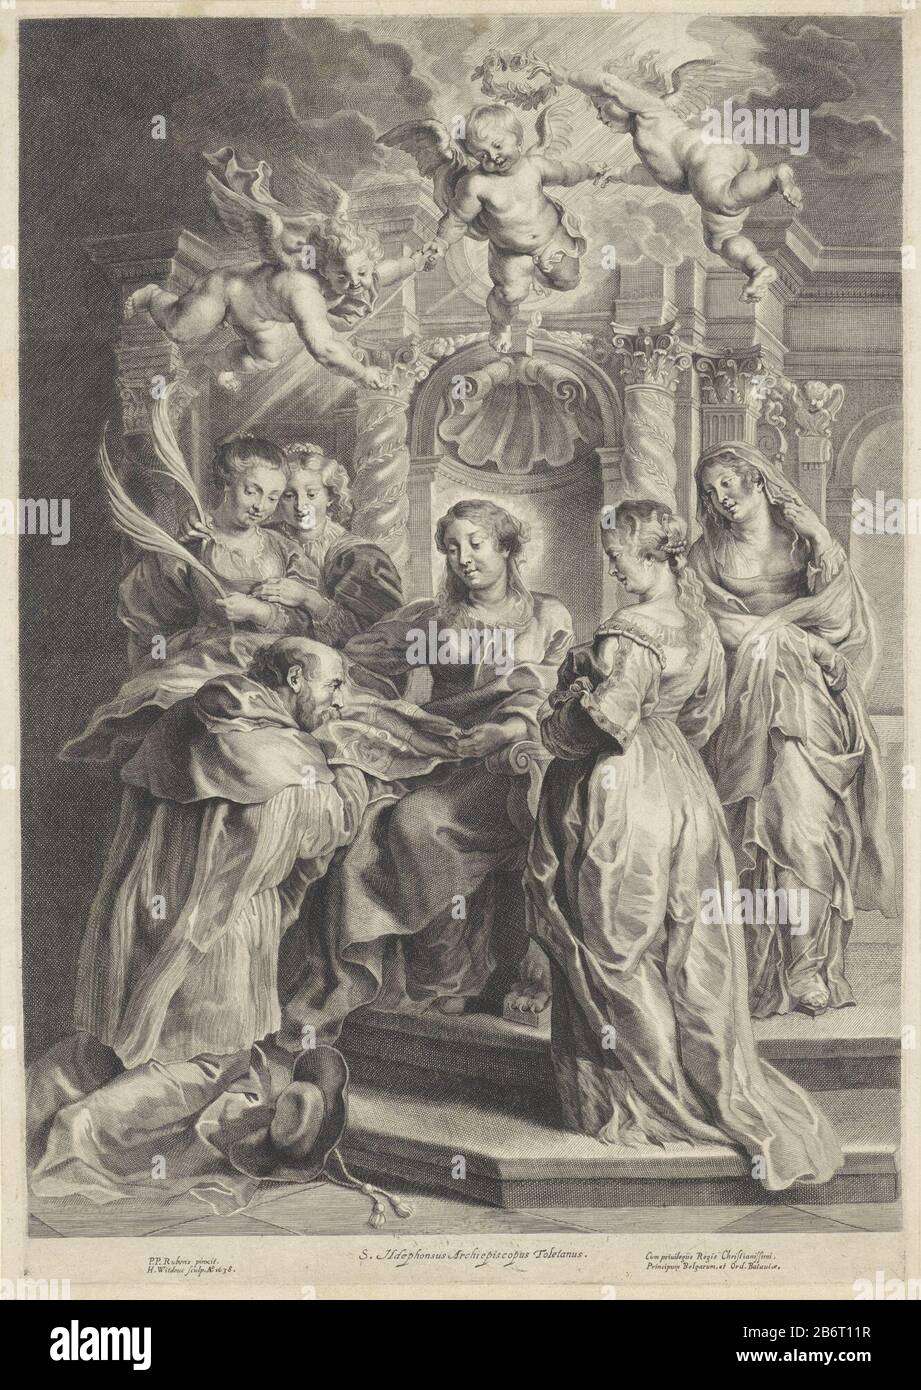 H Ildefonsus van Toledo Holy Ildefonsus, kneeling before Mary, a chasuble him aanbiedt. Manufacturer : printmaker: Hans Witdoeck (listed property) to painting by Peter Paul Rubens (listed property) provider of privilege Spanish crown (listed property) Place manufacture : Antwerp Date: 1638 Physical features: car material: paper Technique: engra (printing process) Dimensions: plate edge: h 538 mm × W 378 mm Subject: the Virgin Mary Appears to St. Ildefonso and gives him a chasuble Stock Photo